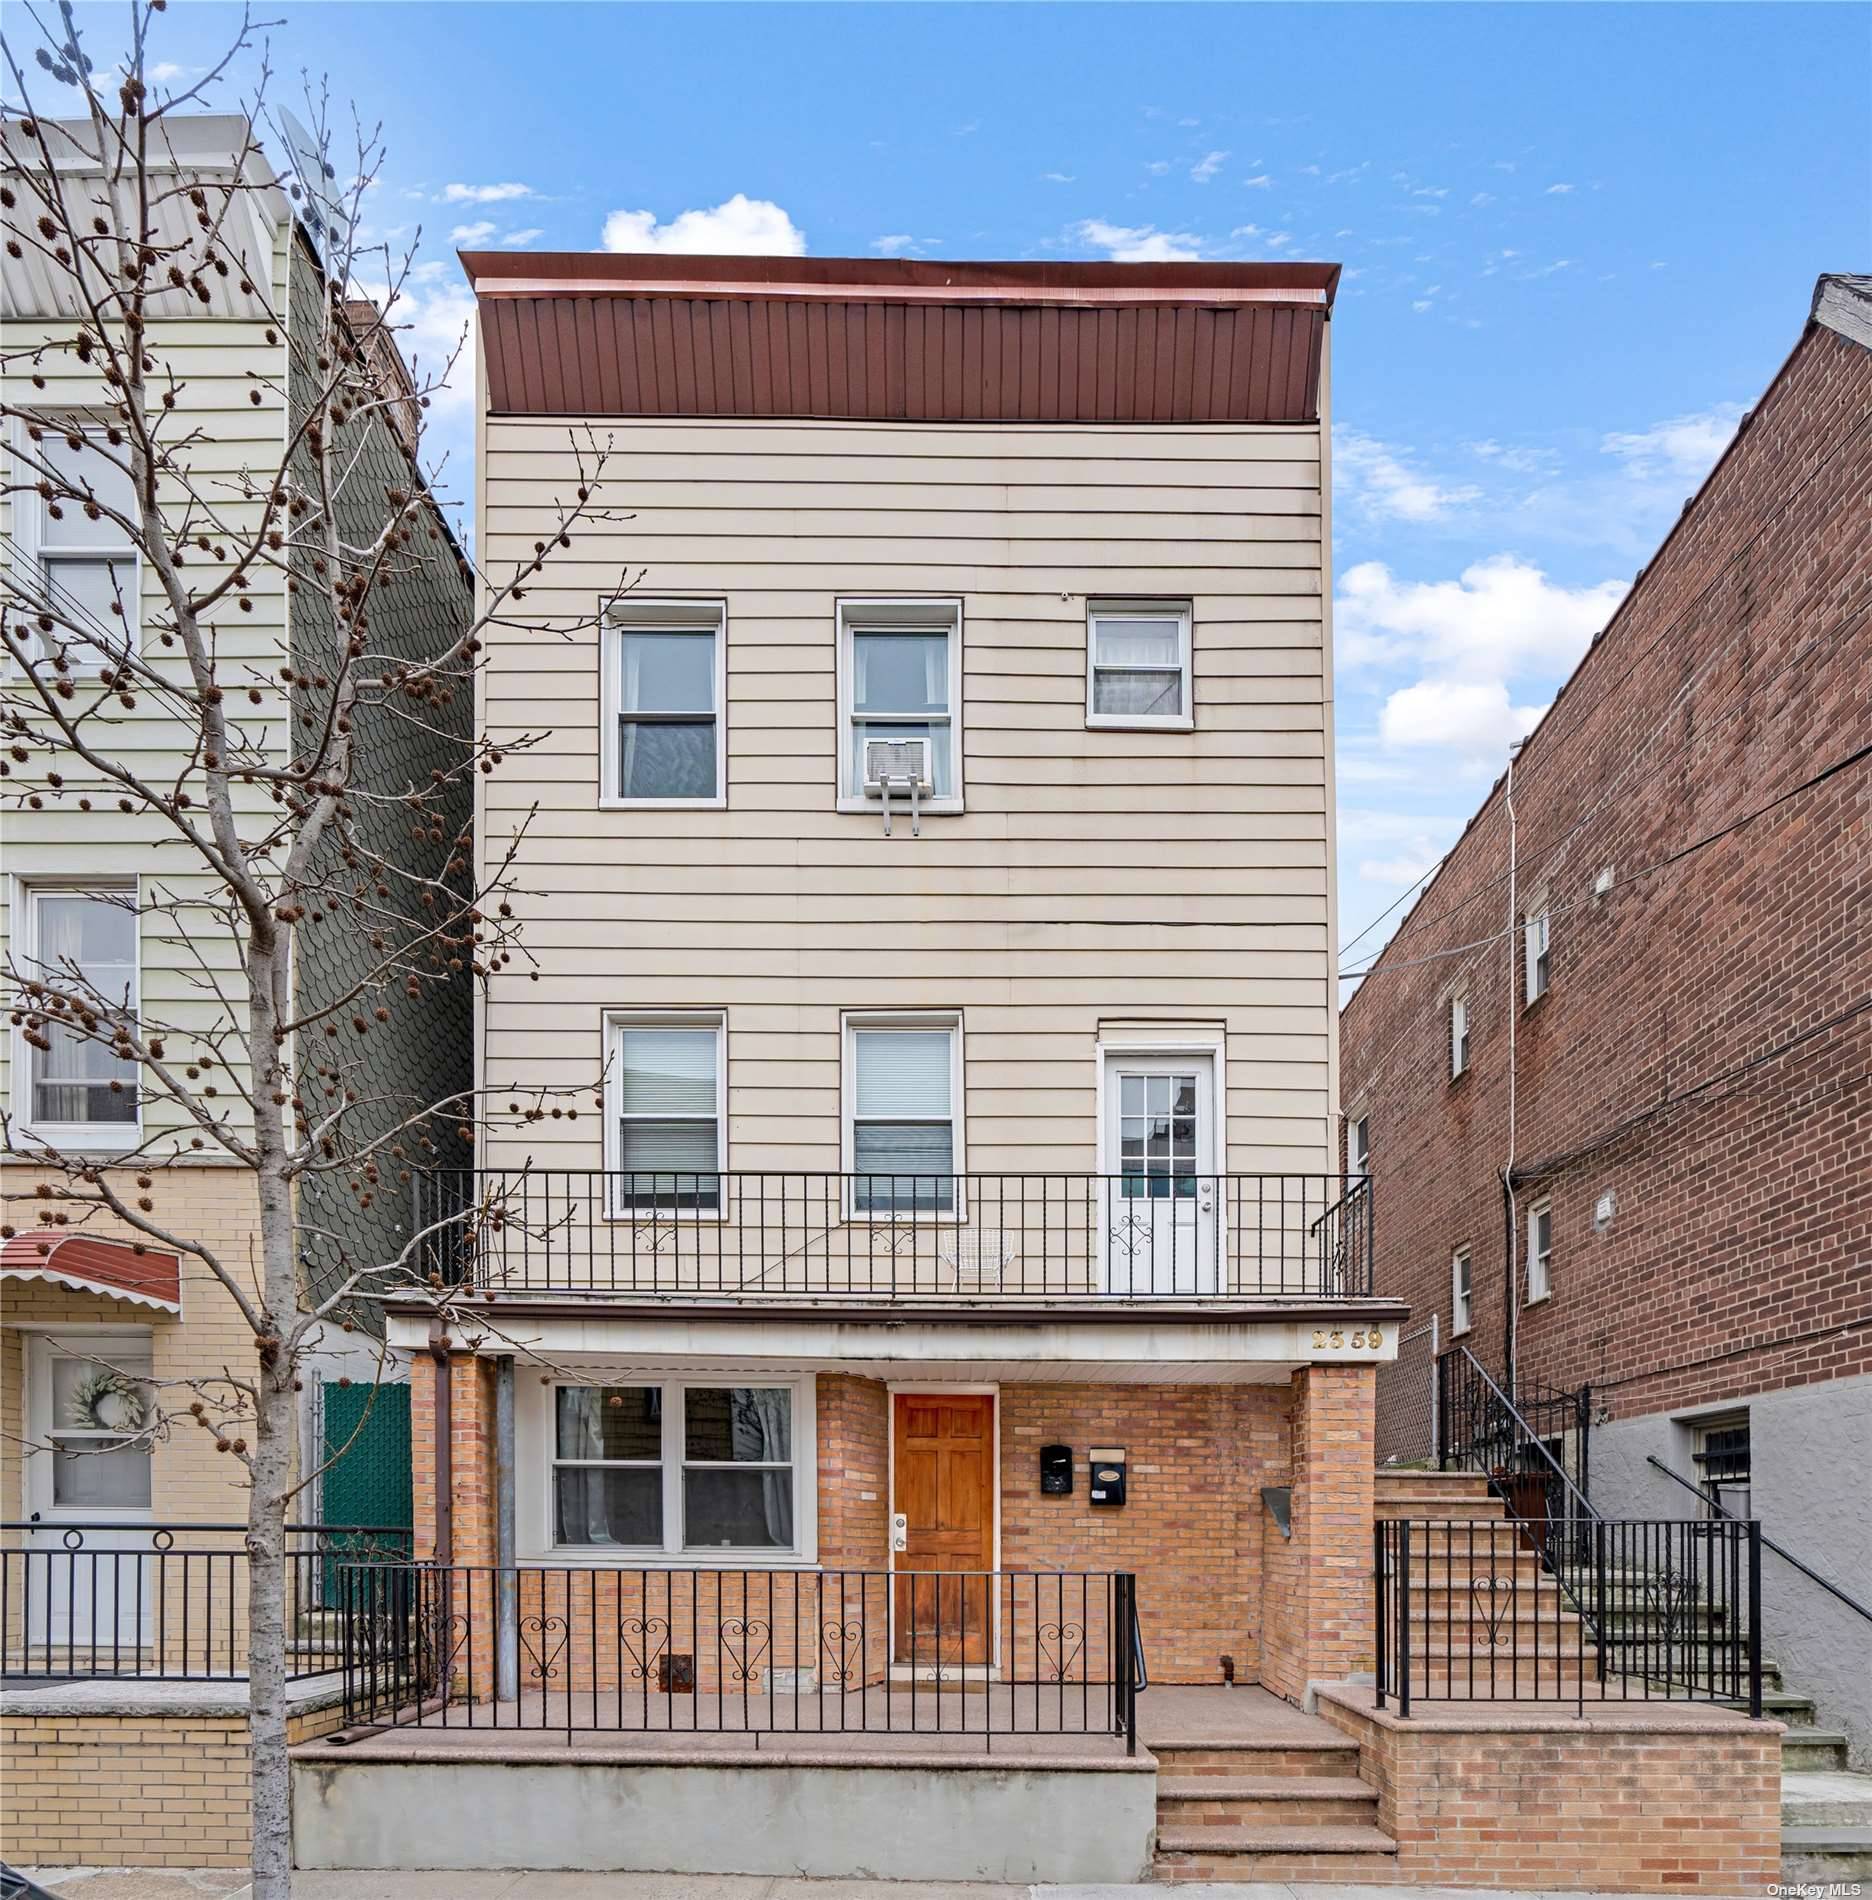 New to market Turn key Fully detached legal 3 family home in the Ditmars area now available.